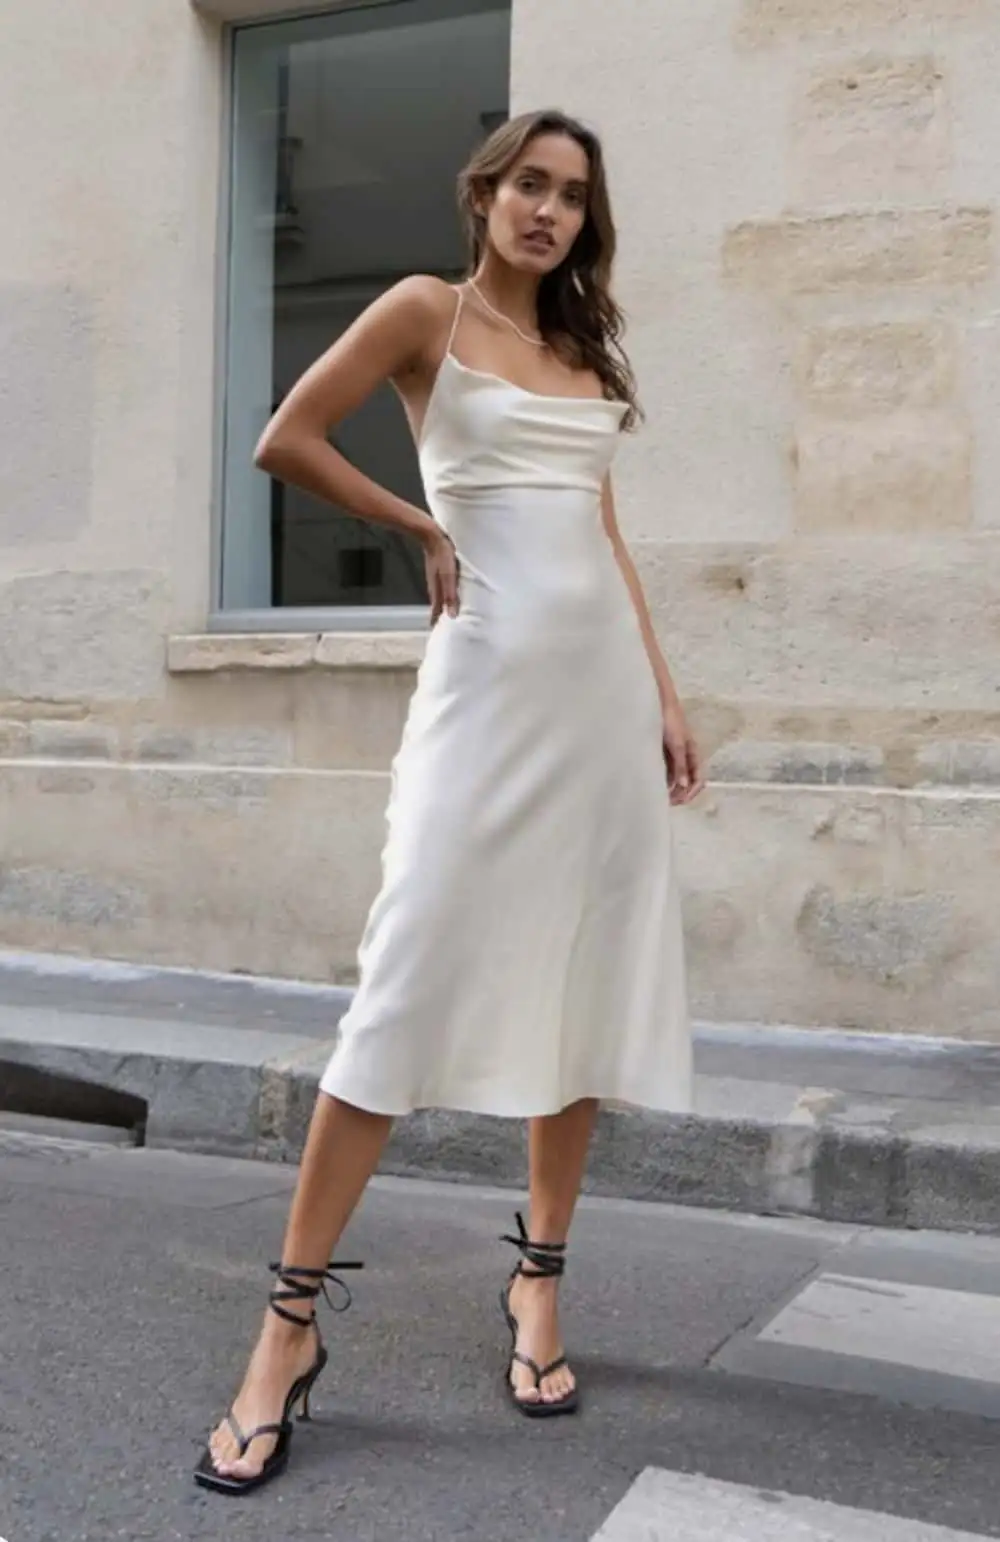 Shoes To Wear With A White Dress: My Favorite 7 Combos